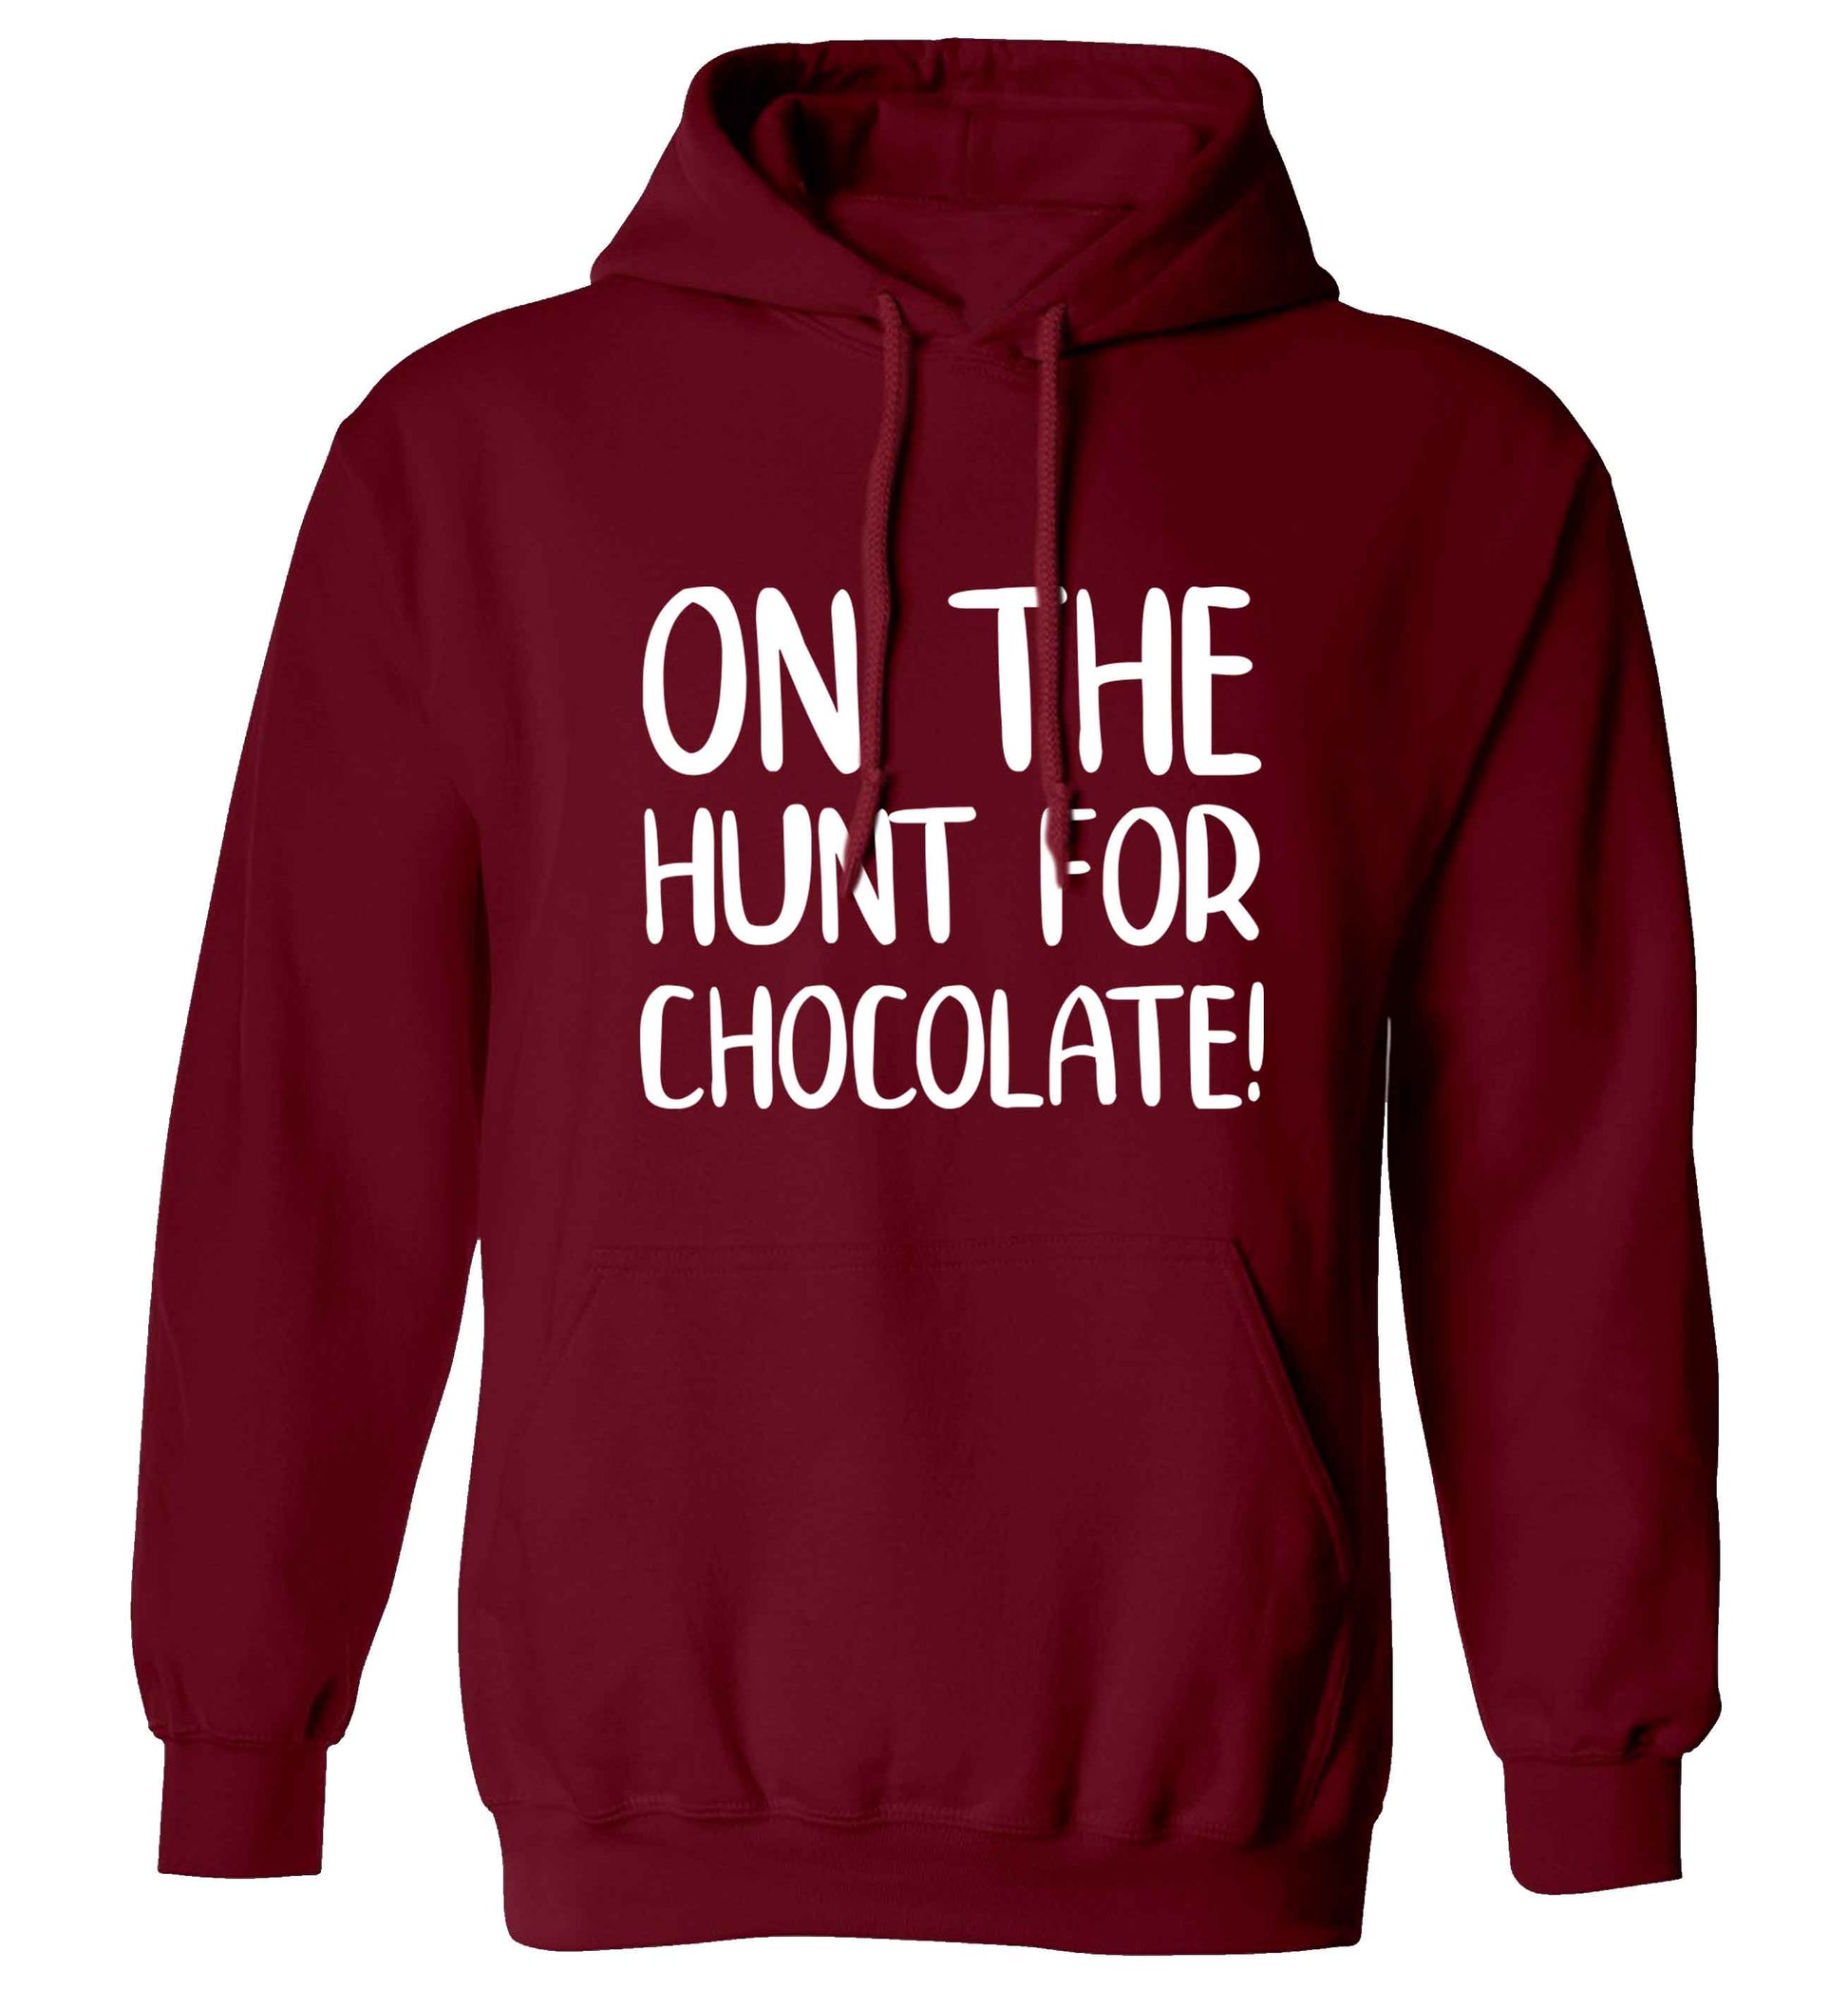 On the hunt for chocolate! adults unisex maroon hoodie 2XL